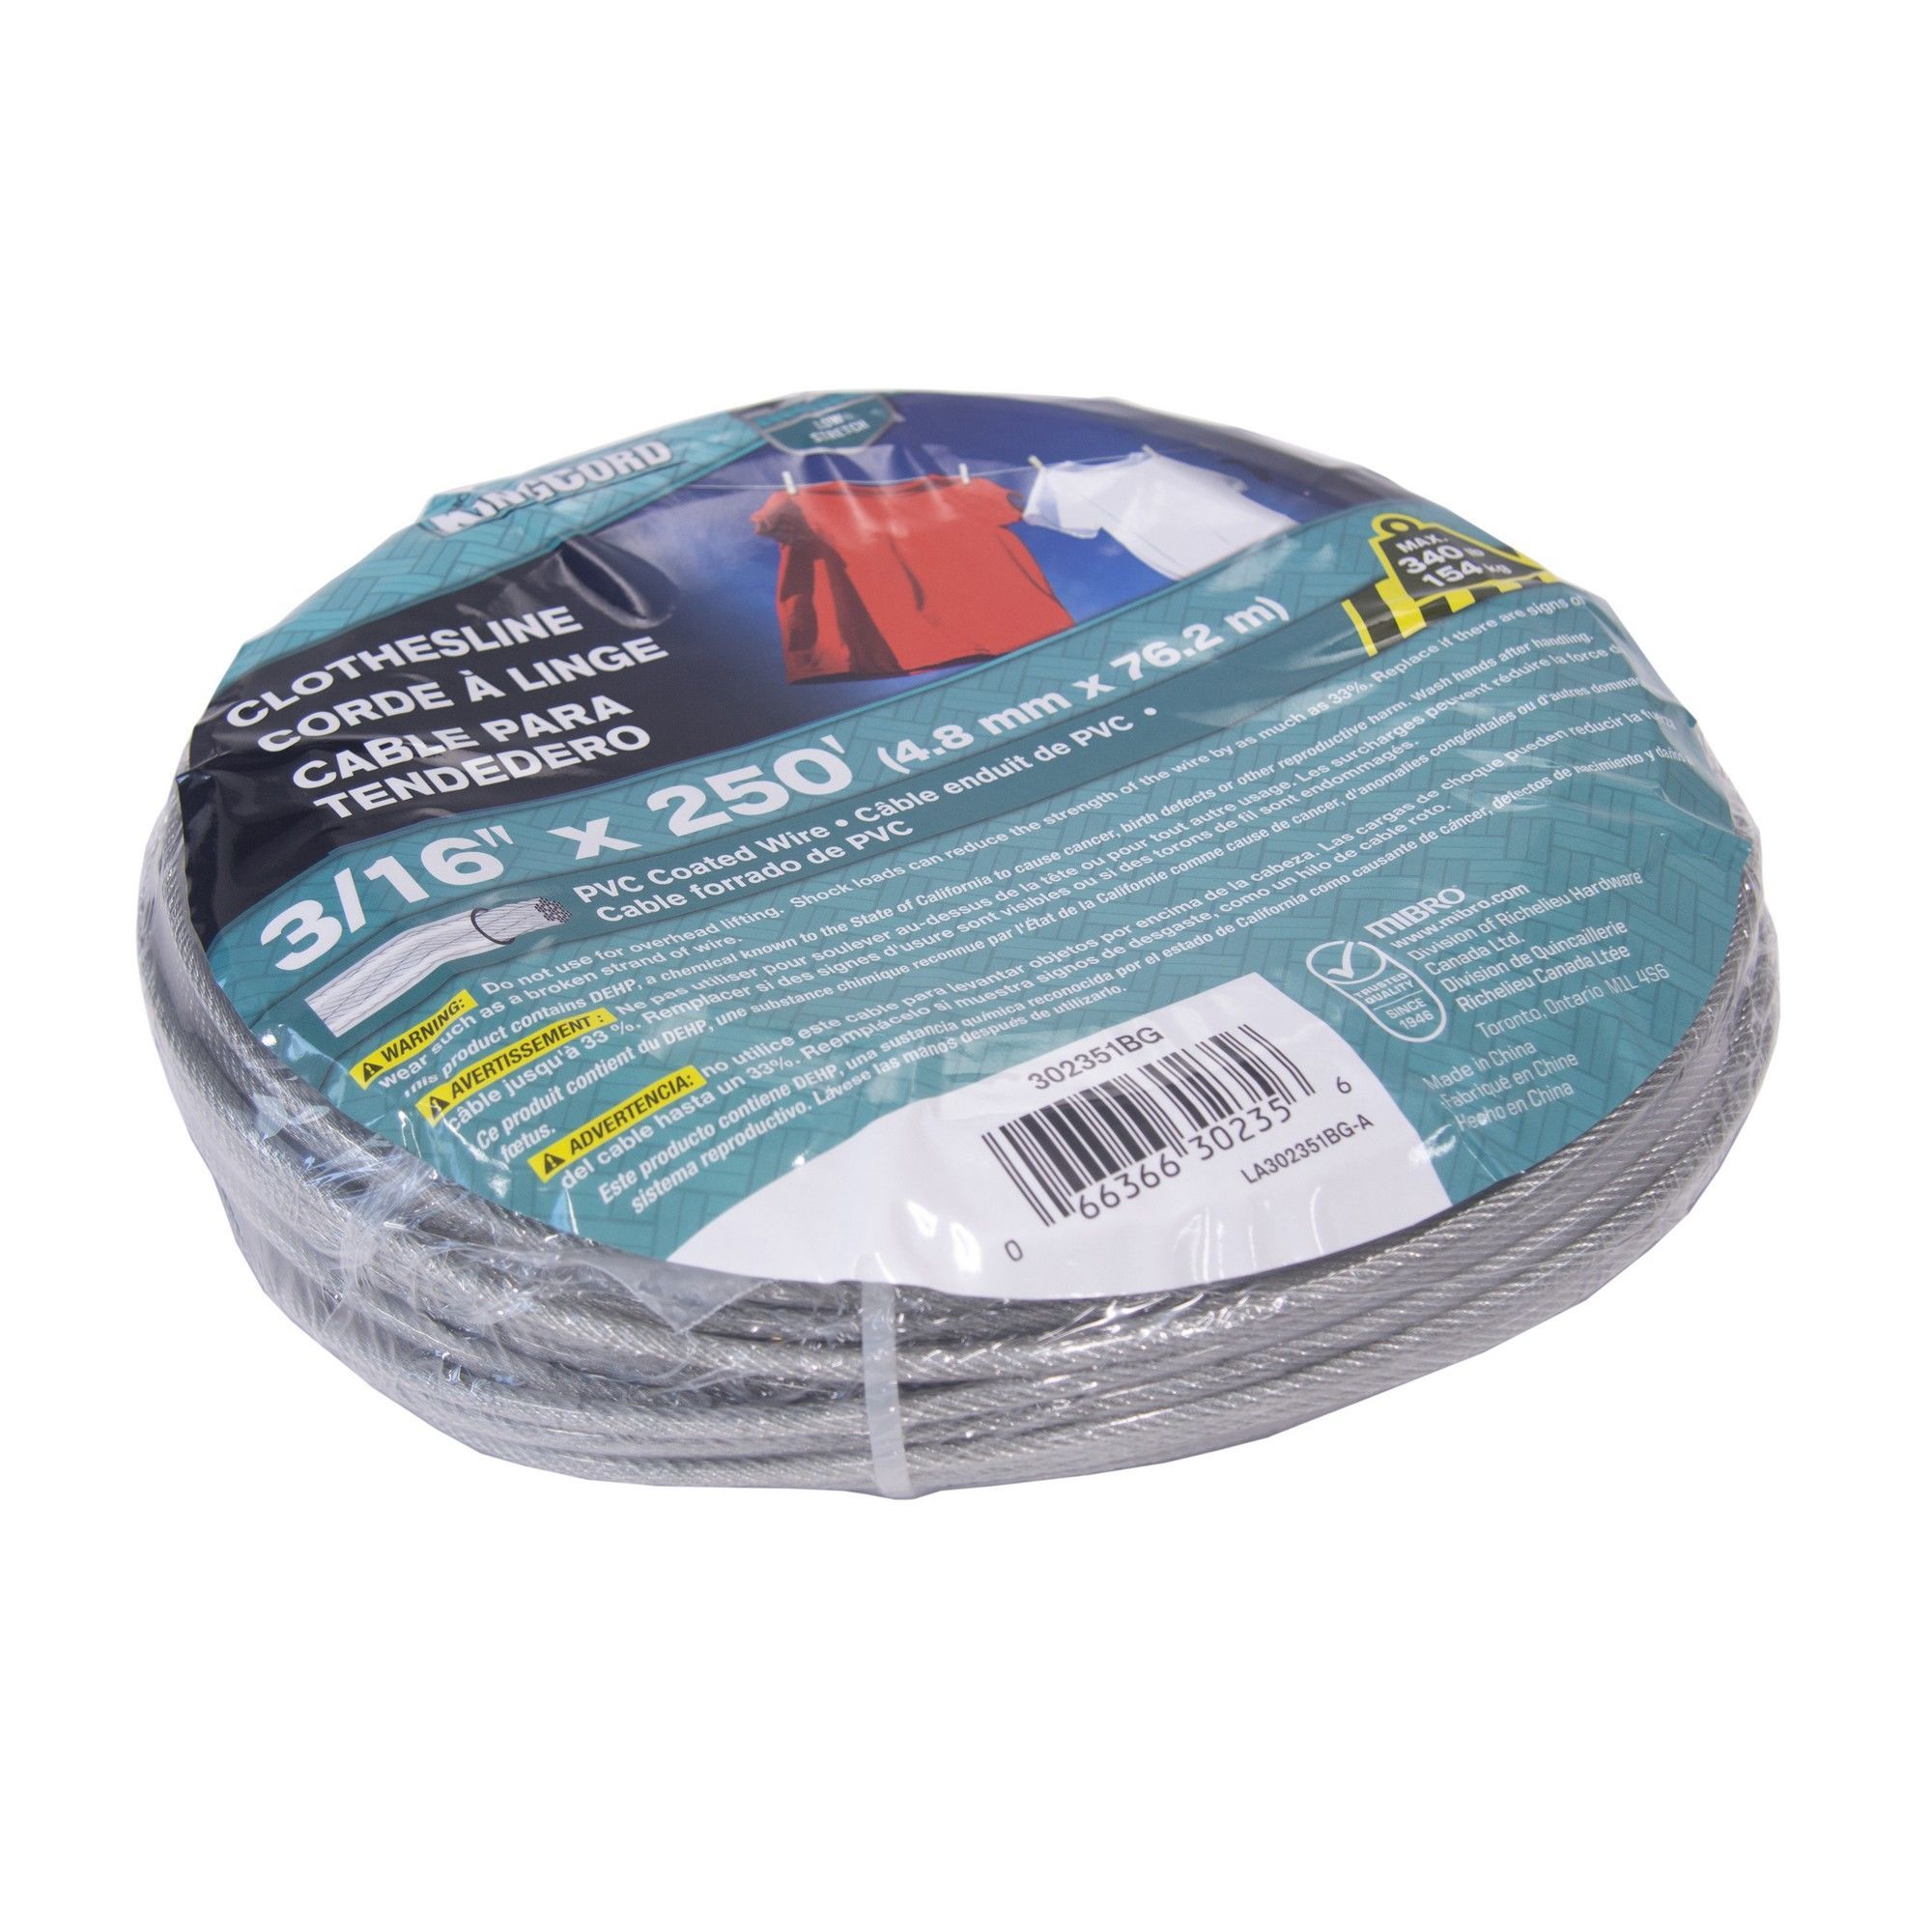 PVC Coated Clothesline Wire - 1/8 X 3/16 X 250' from KINGCORD